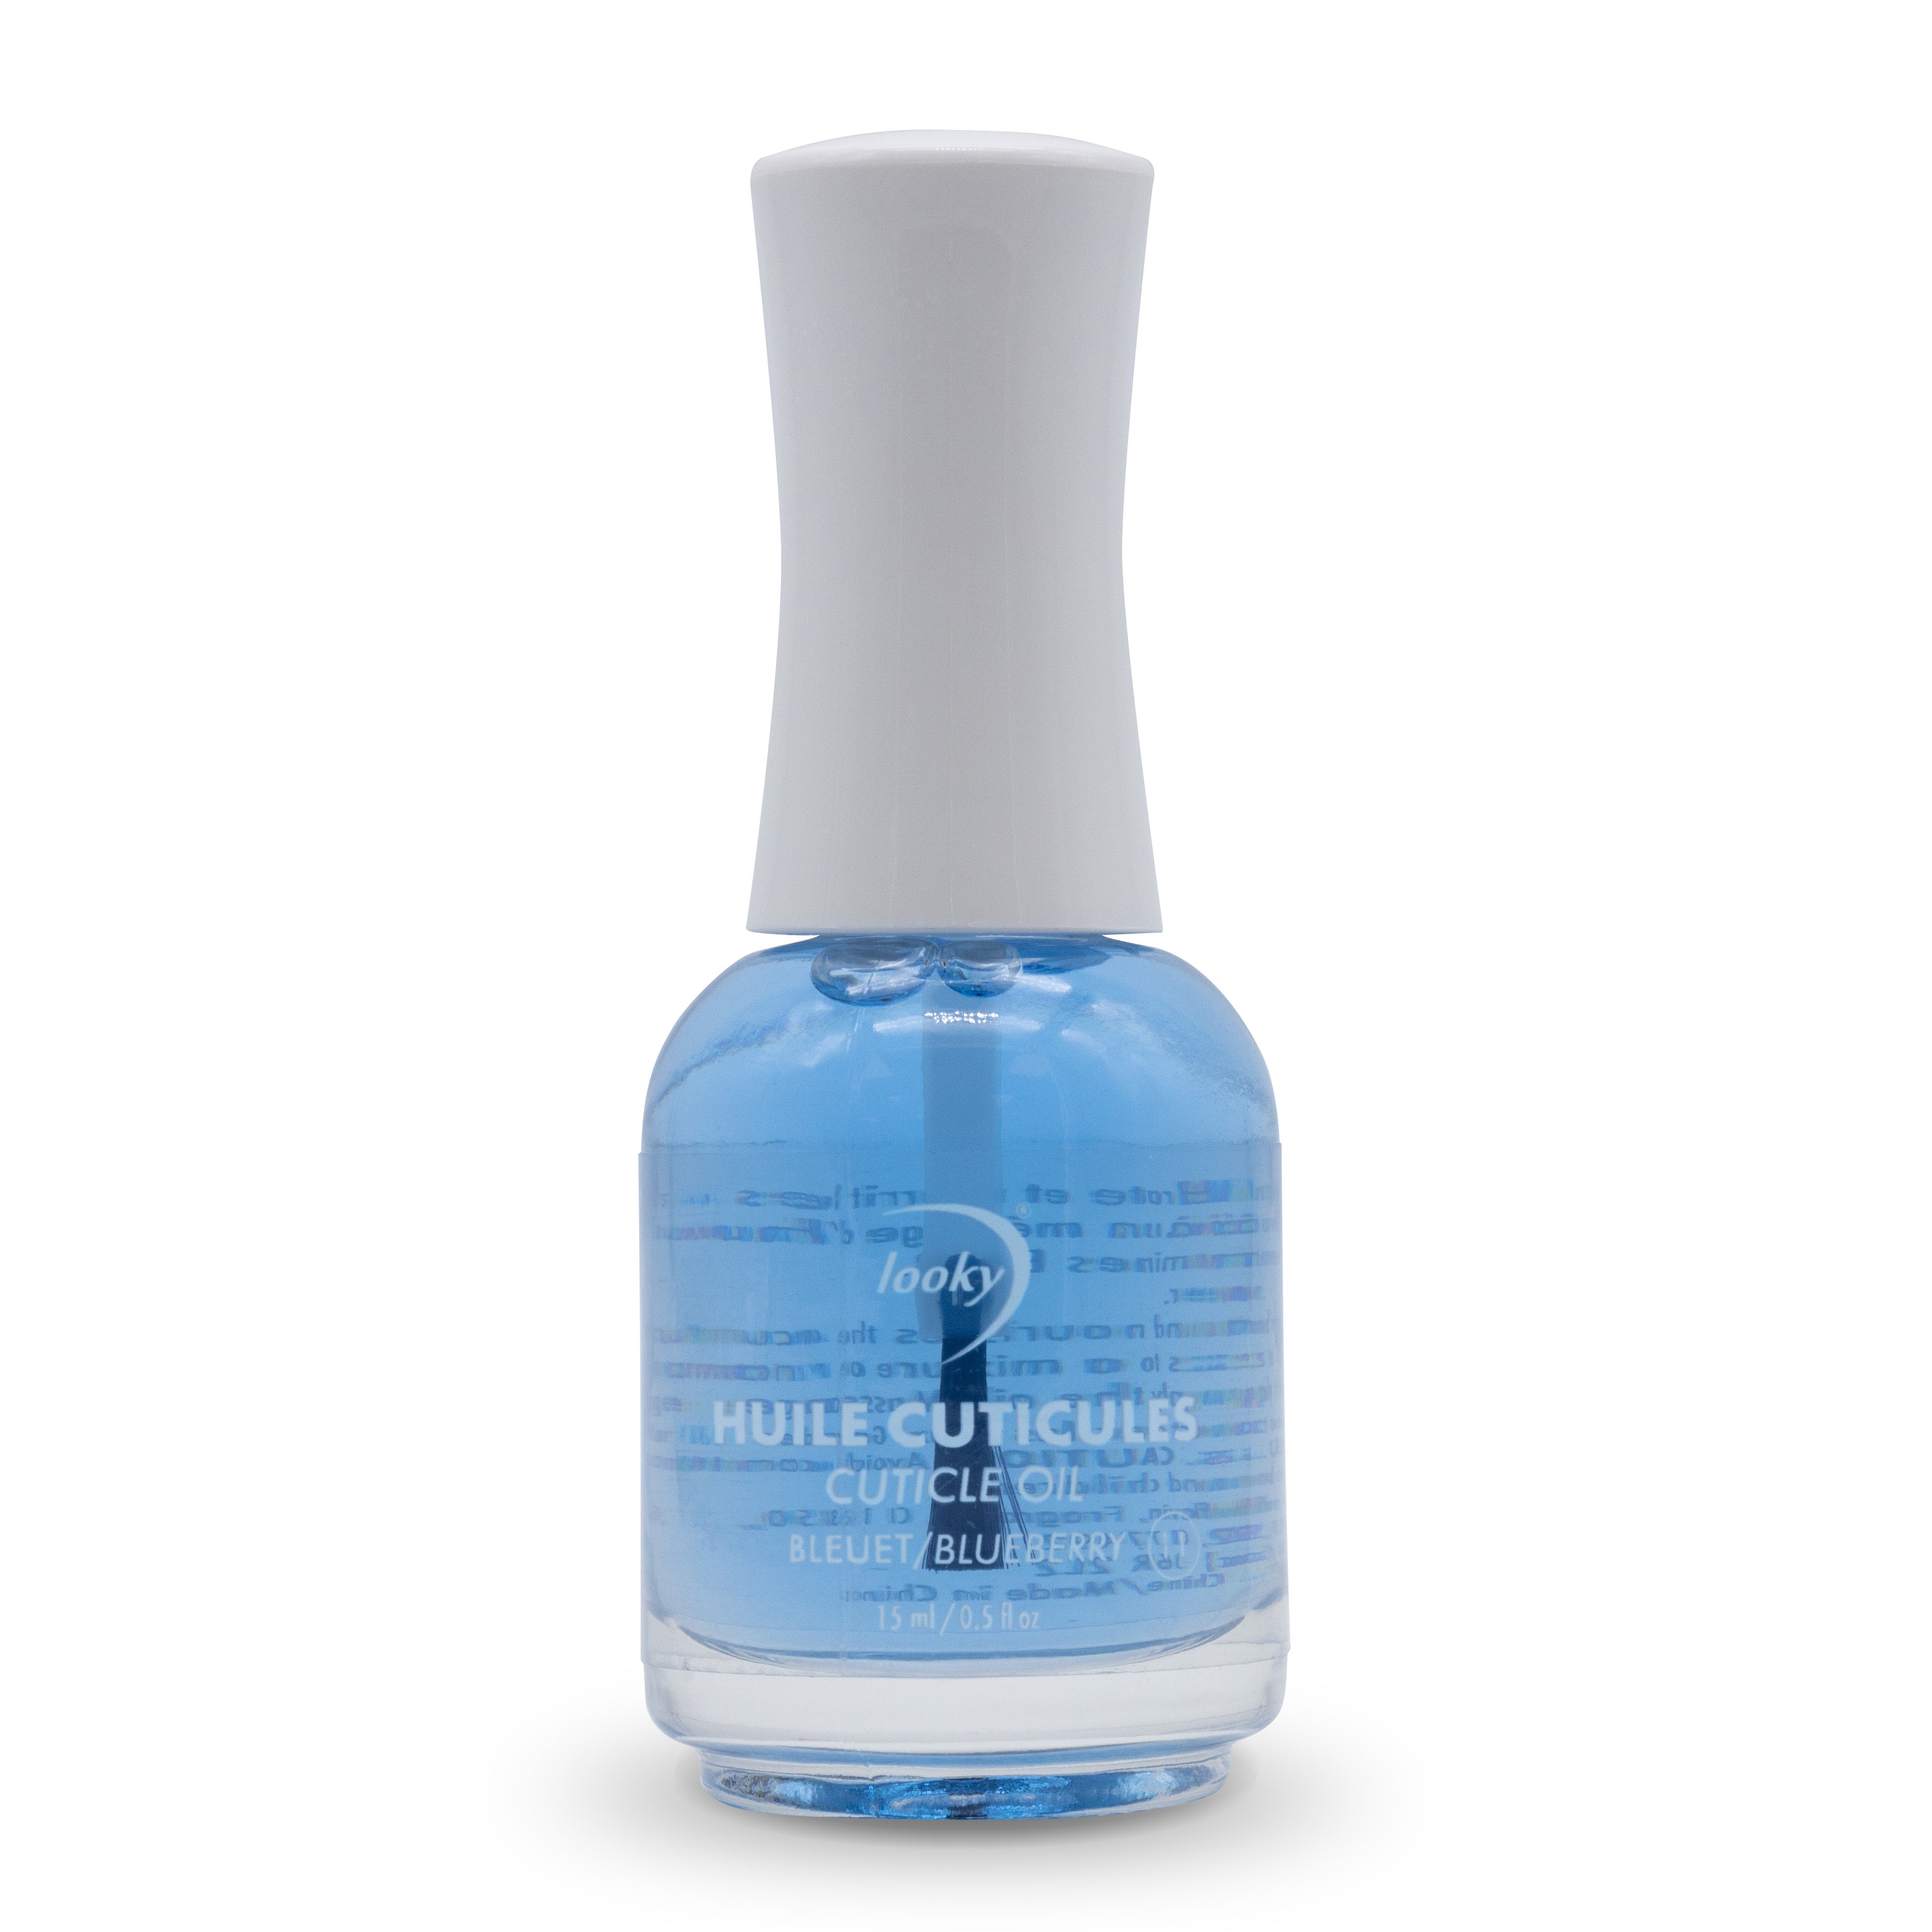 Blueberry Cuticle Oil #11